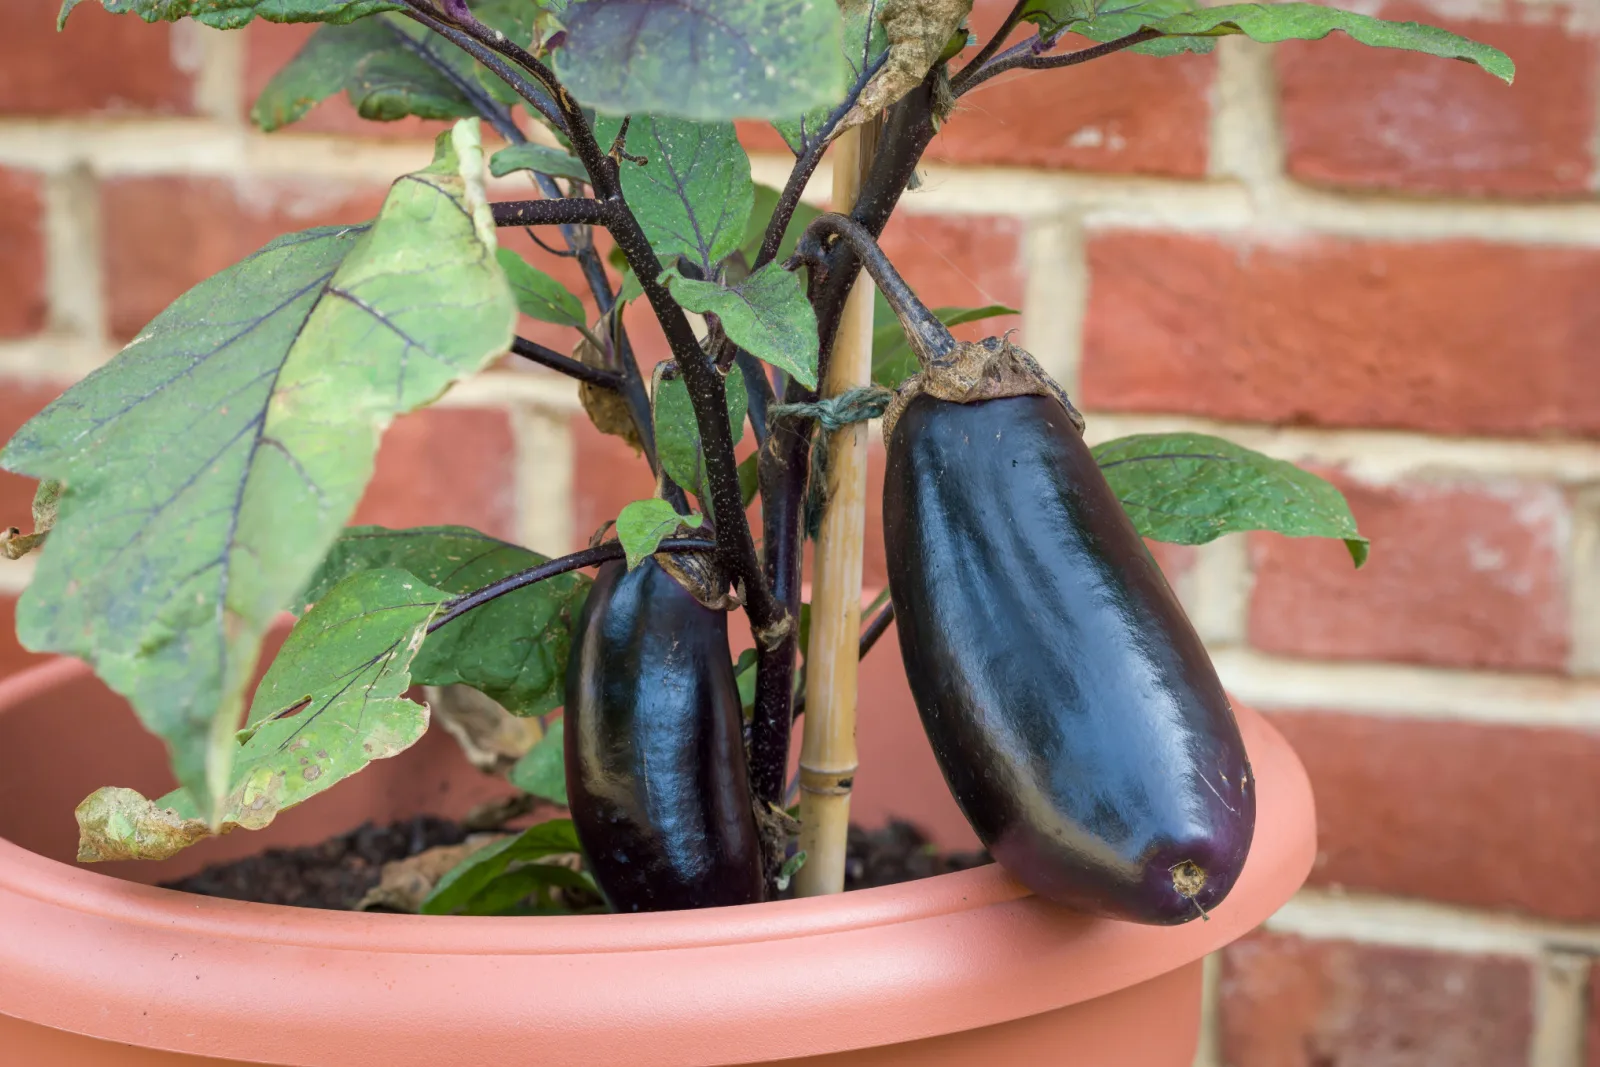 Closeup detail of aubergine fruit (eggplant) plant growing outside in a pot